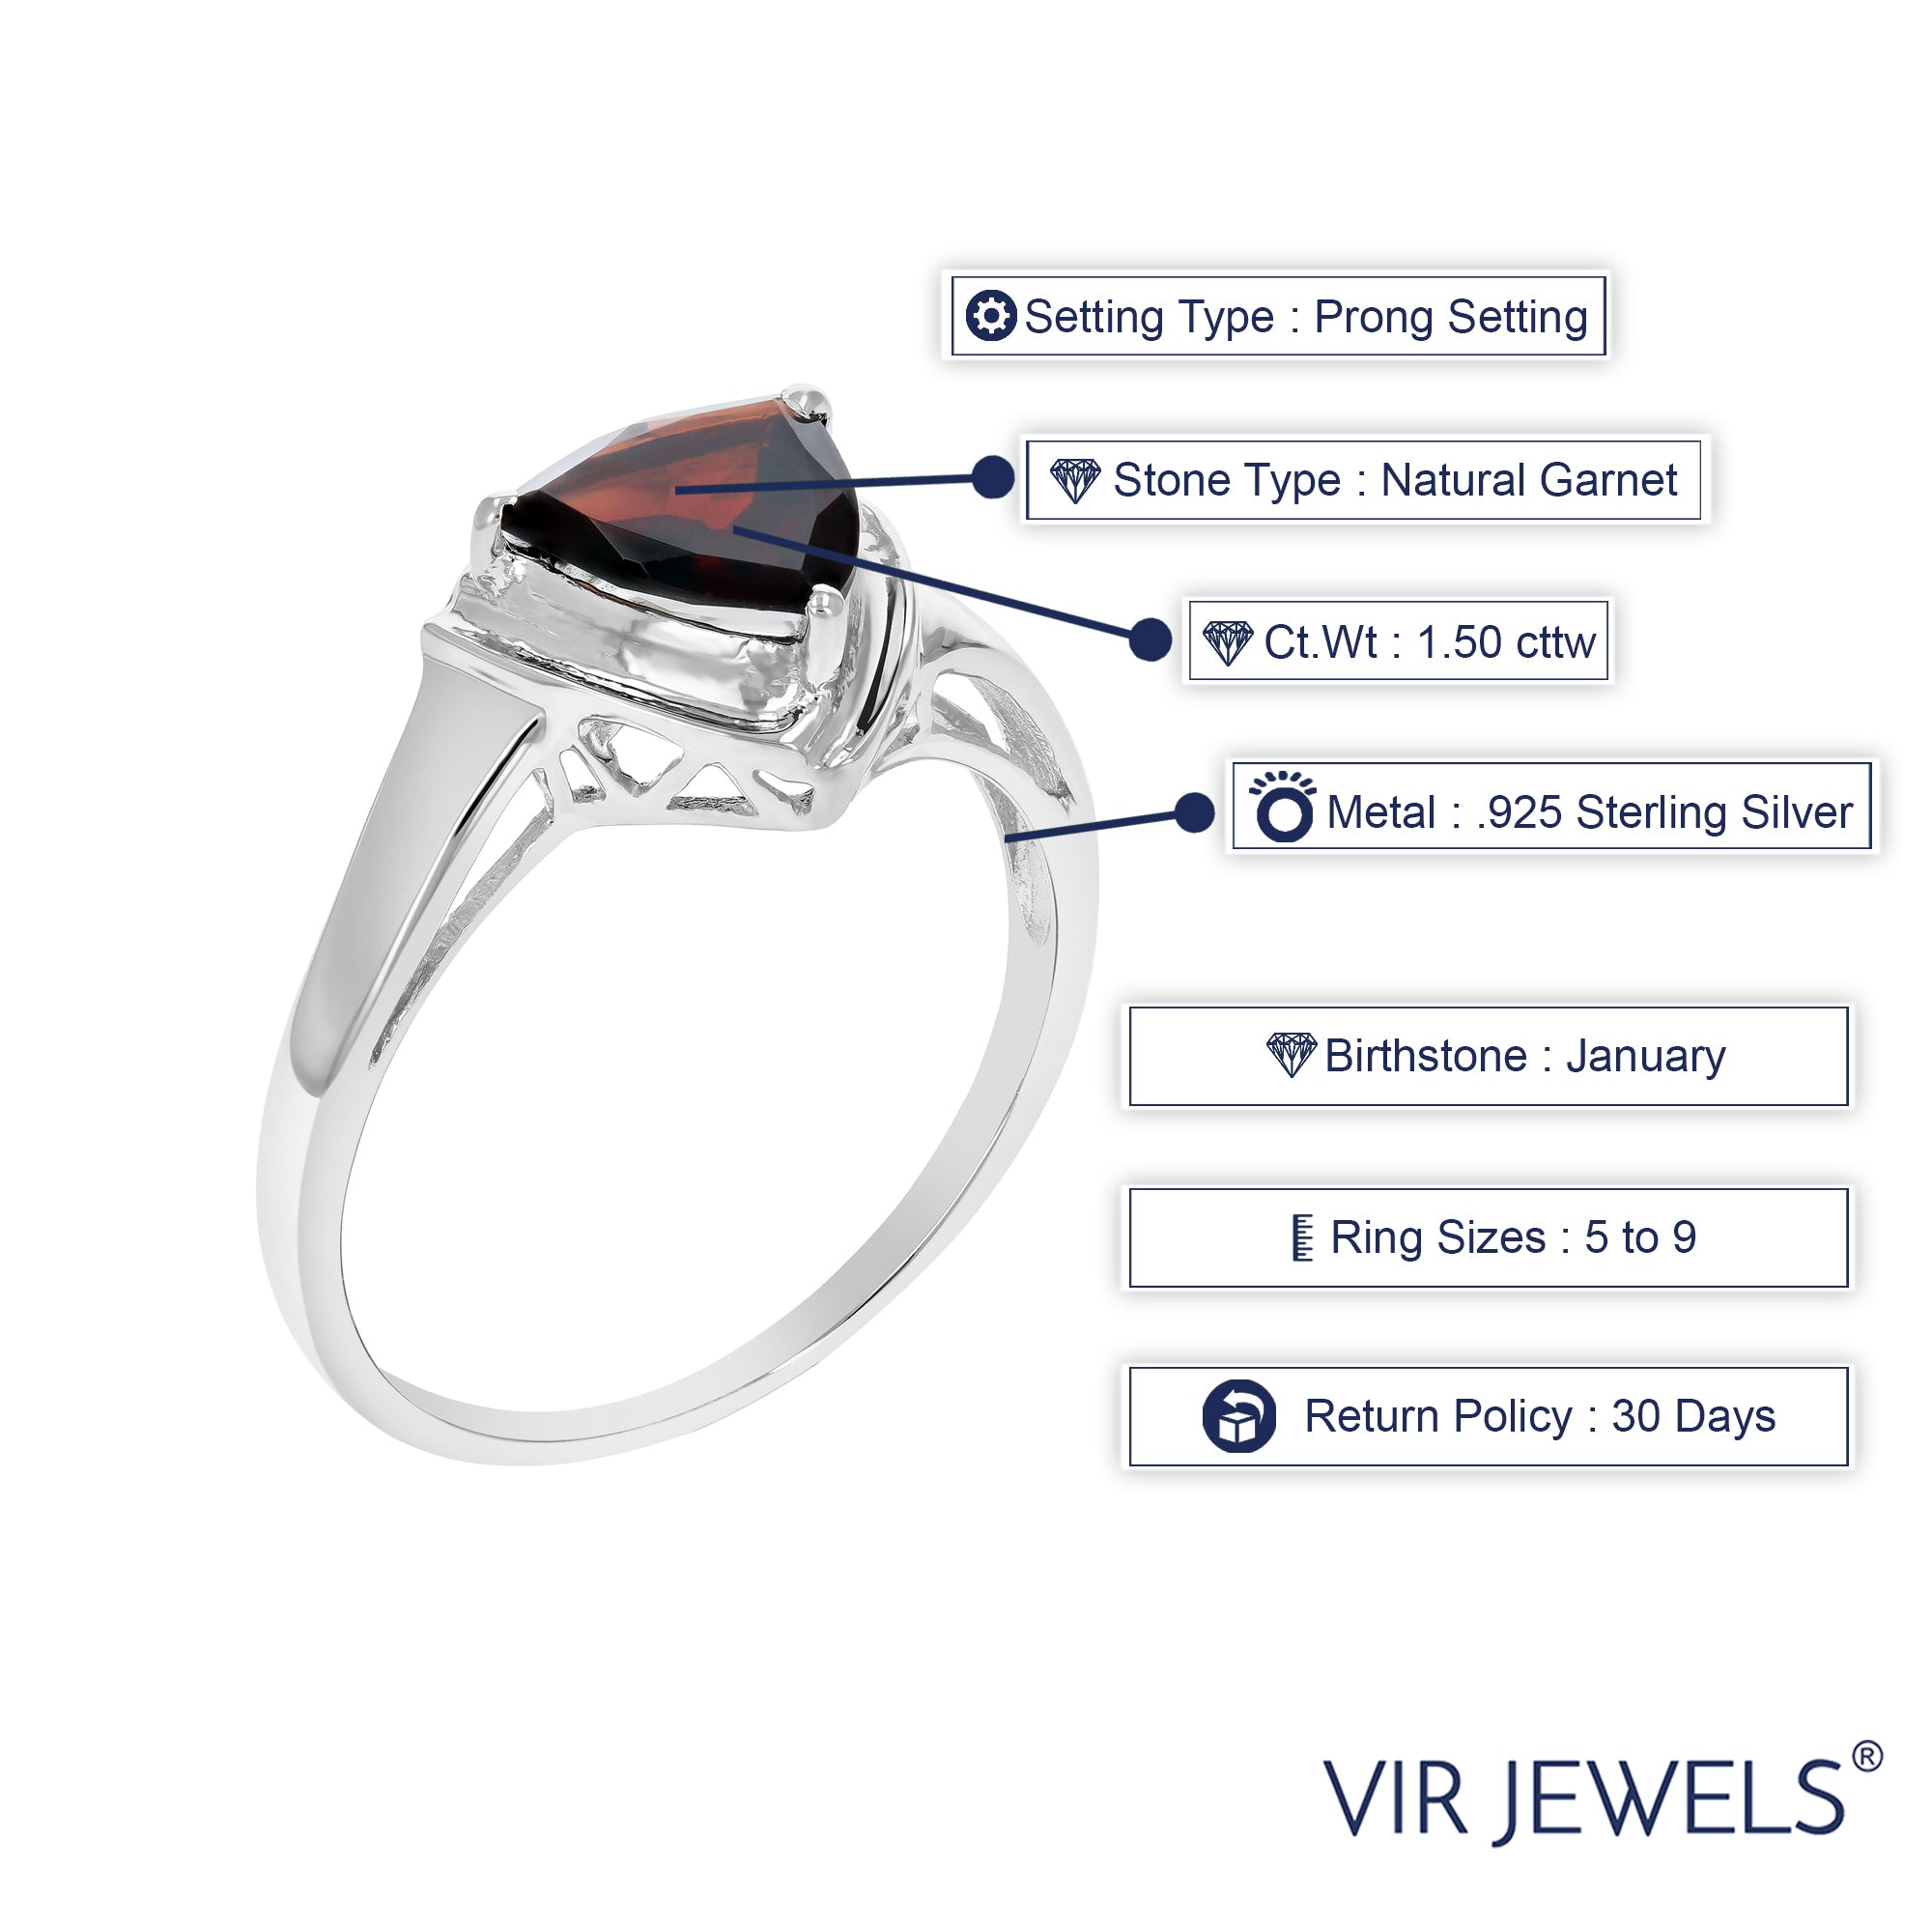 1.50 cttw Garnet Ring .925 Sterling Silver with Rhodium Plating Triangle Shape